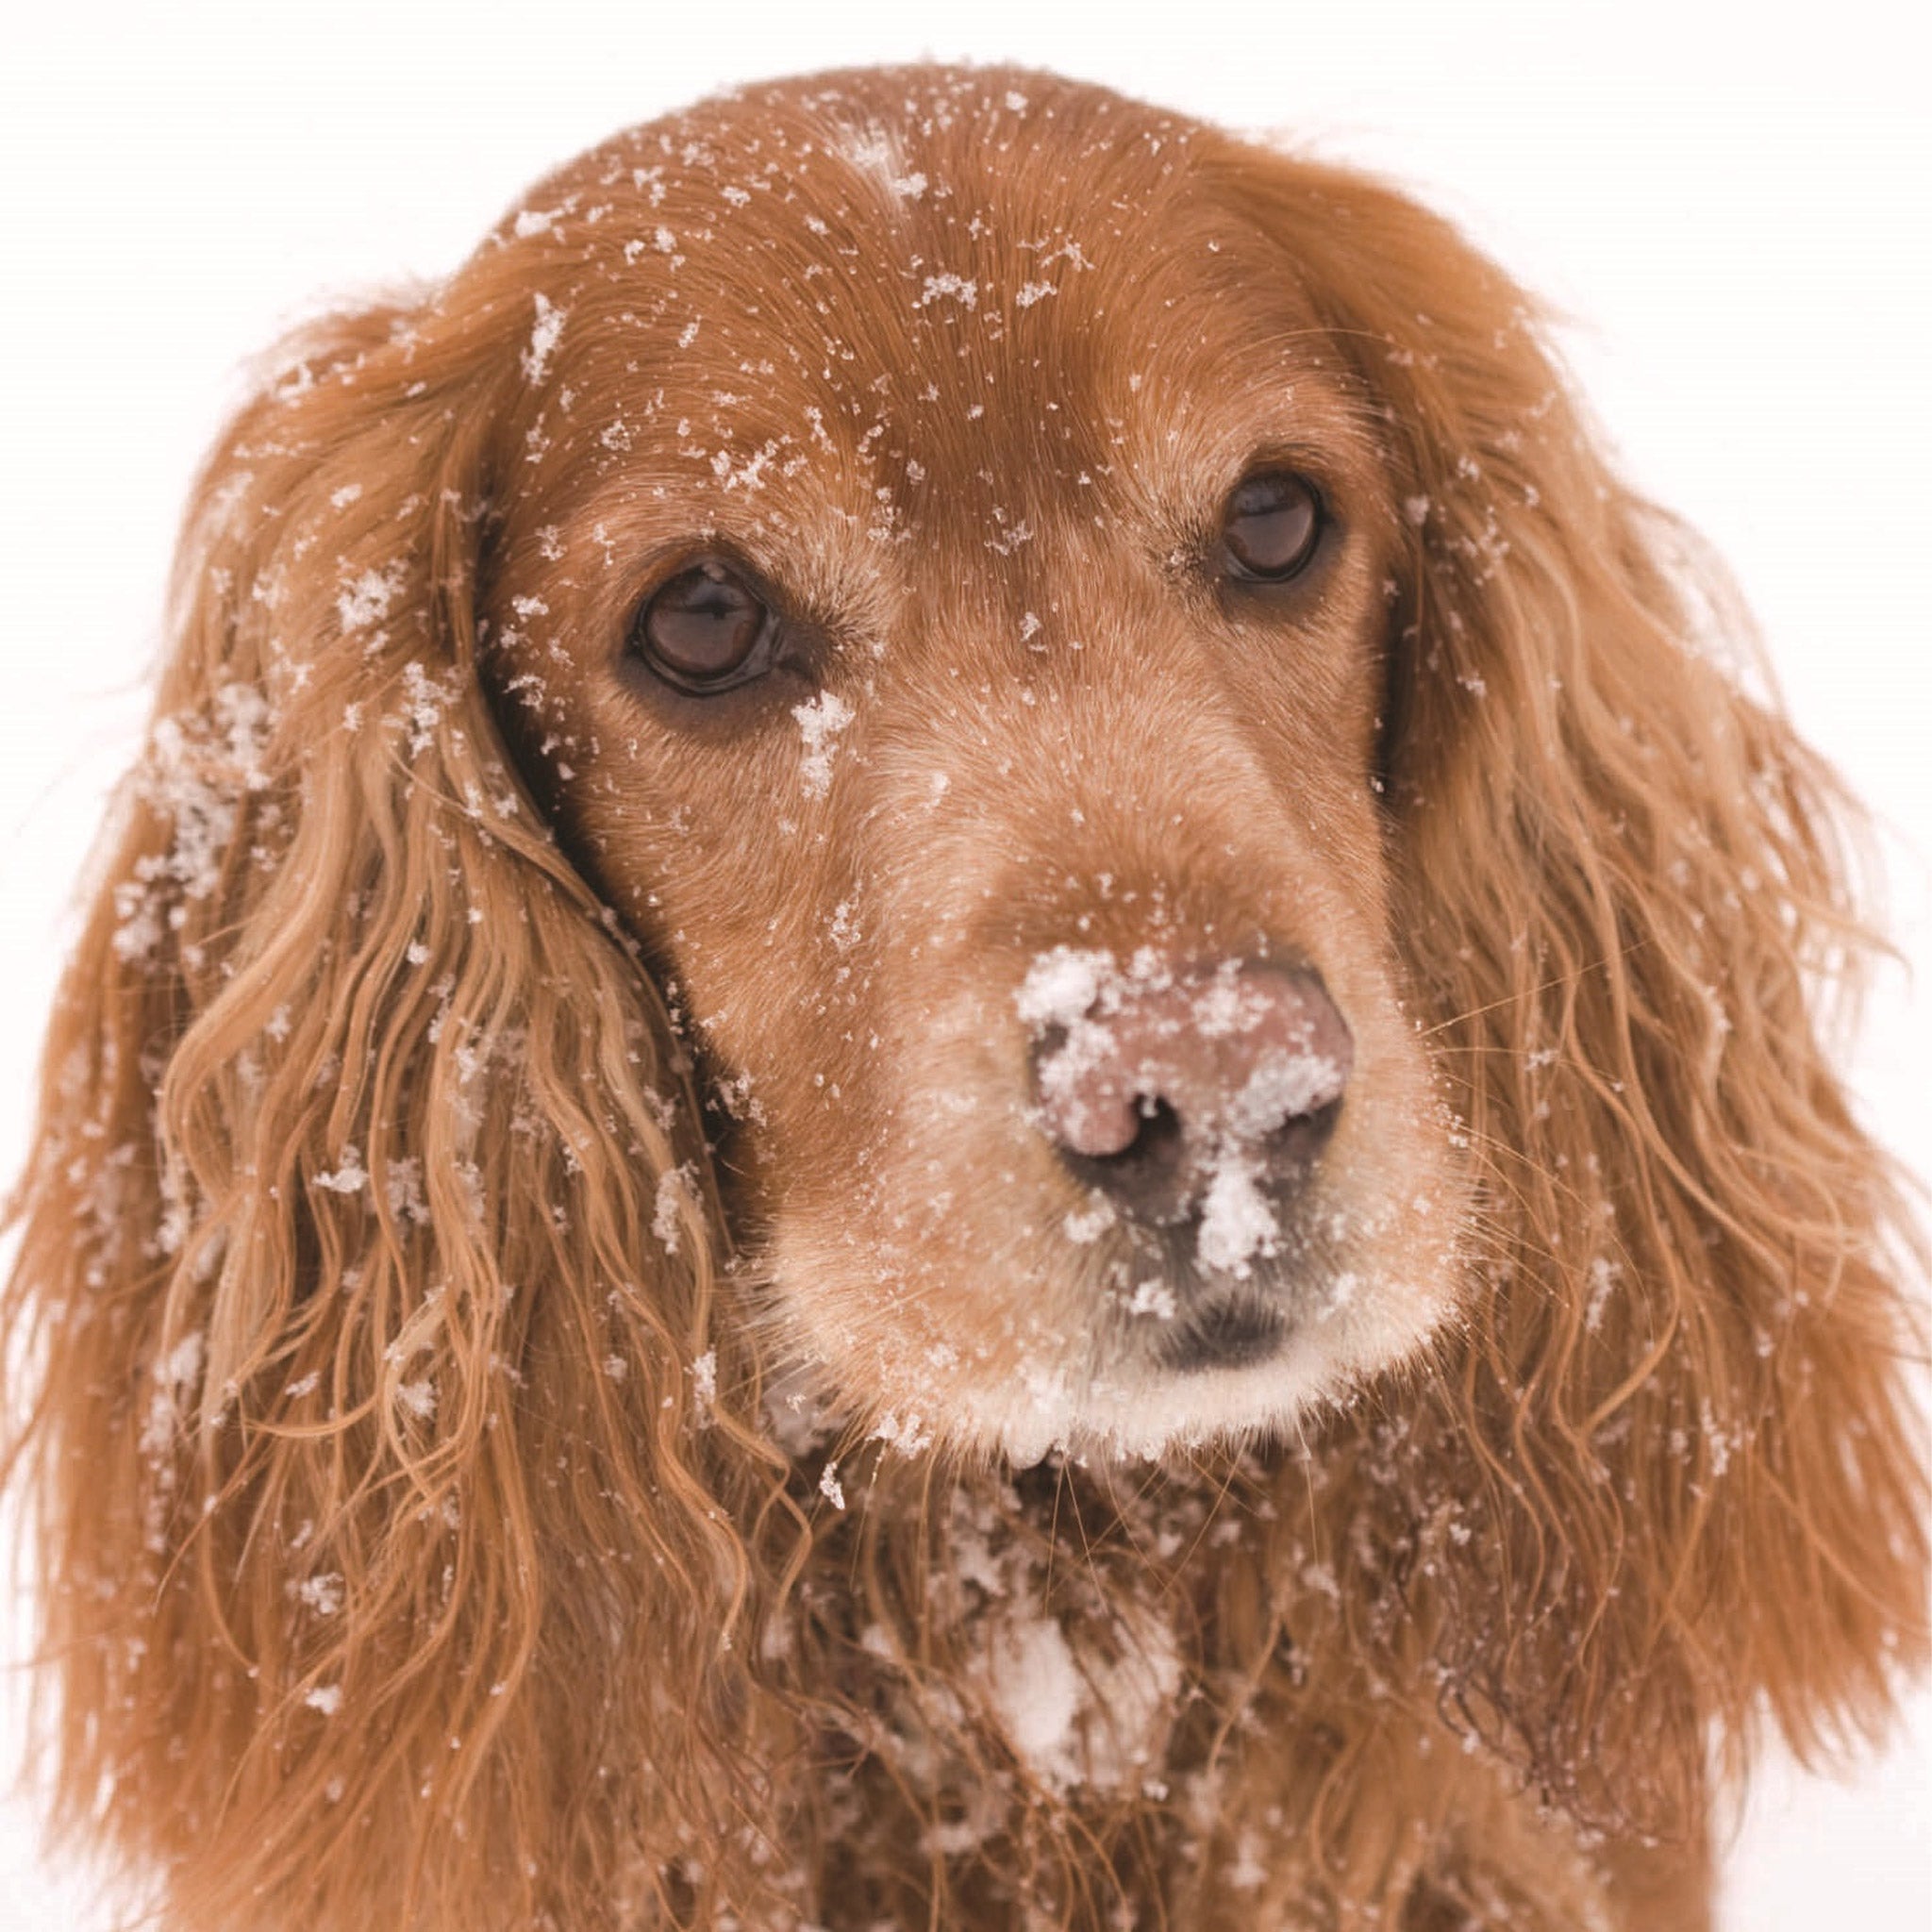 A close up image of a golden spaniel in snow, with snow flakes on the dogs ear, head and nose.